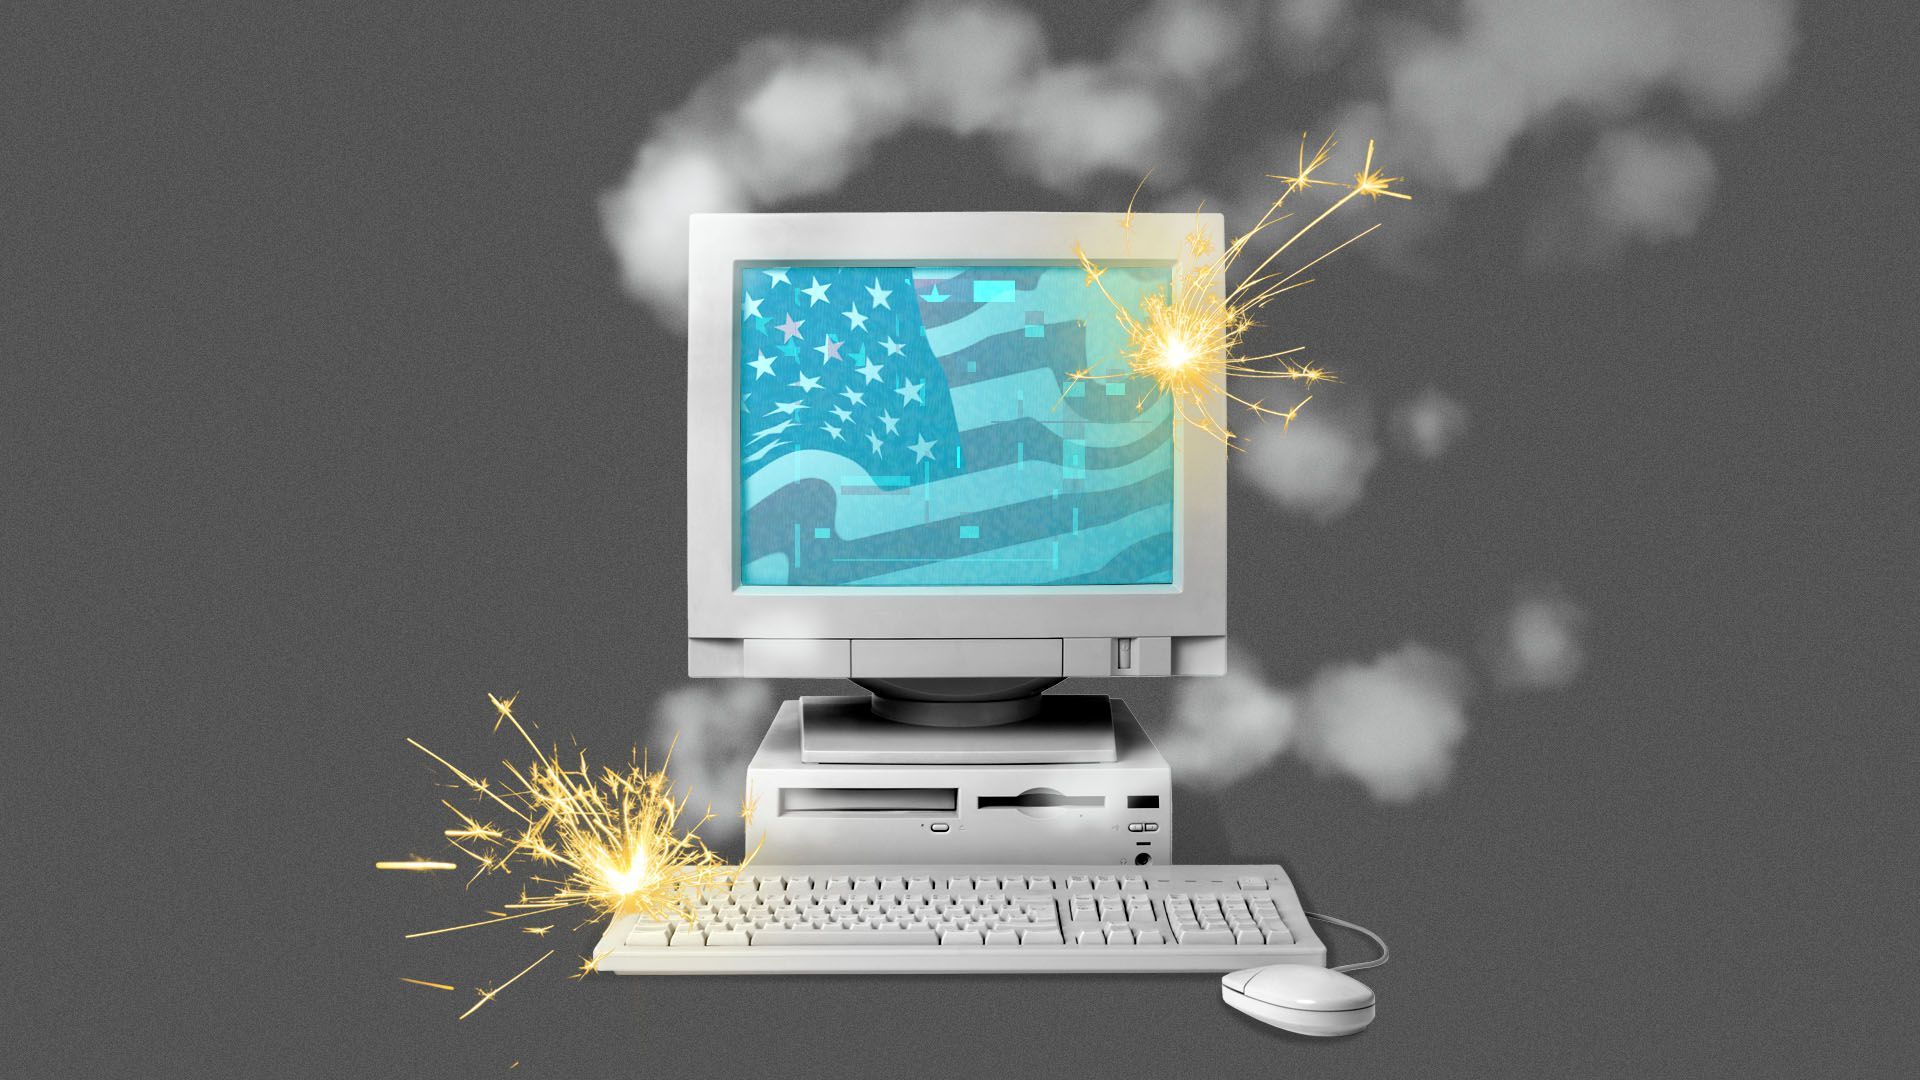 Illustration of a sparking and smoking computer with a distorted flag on the screen